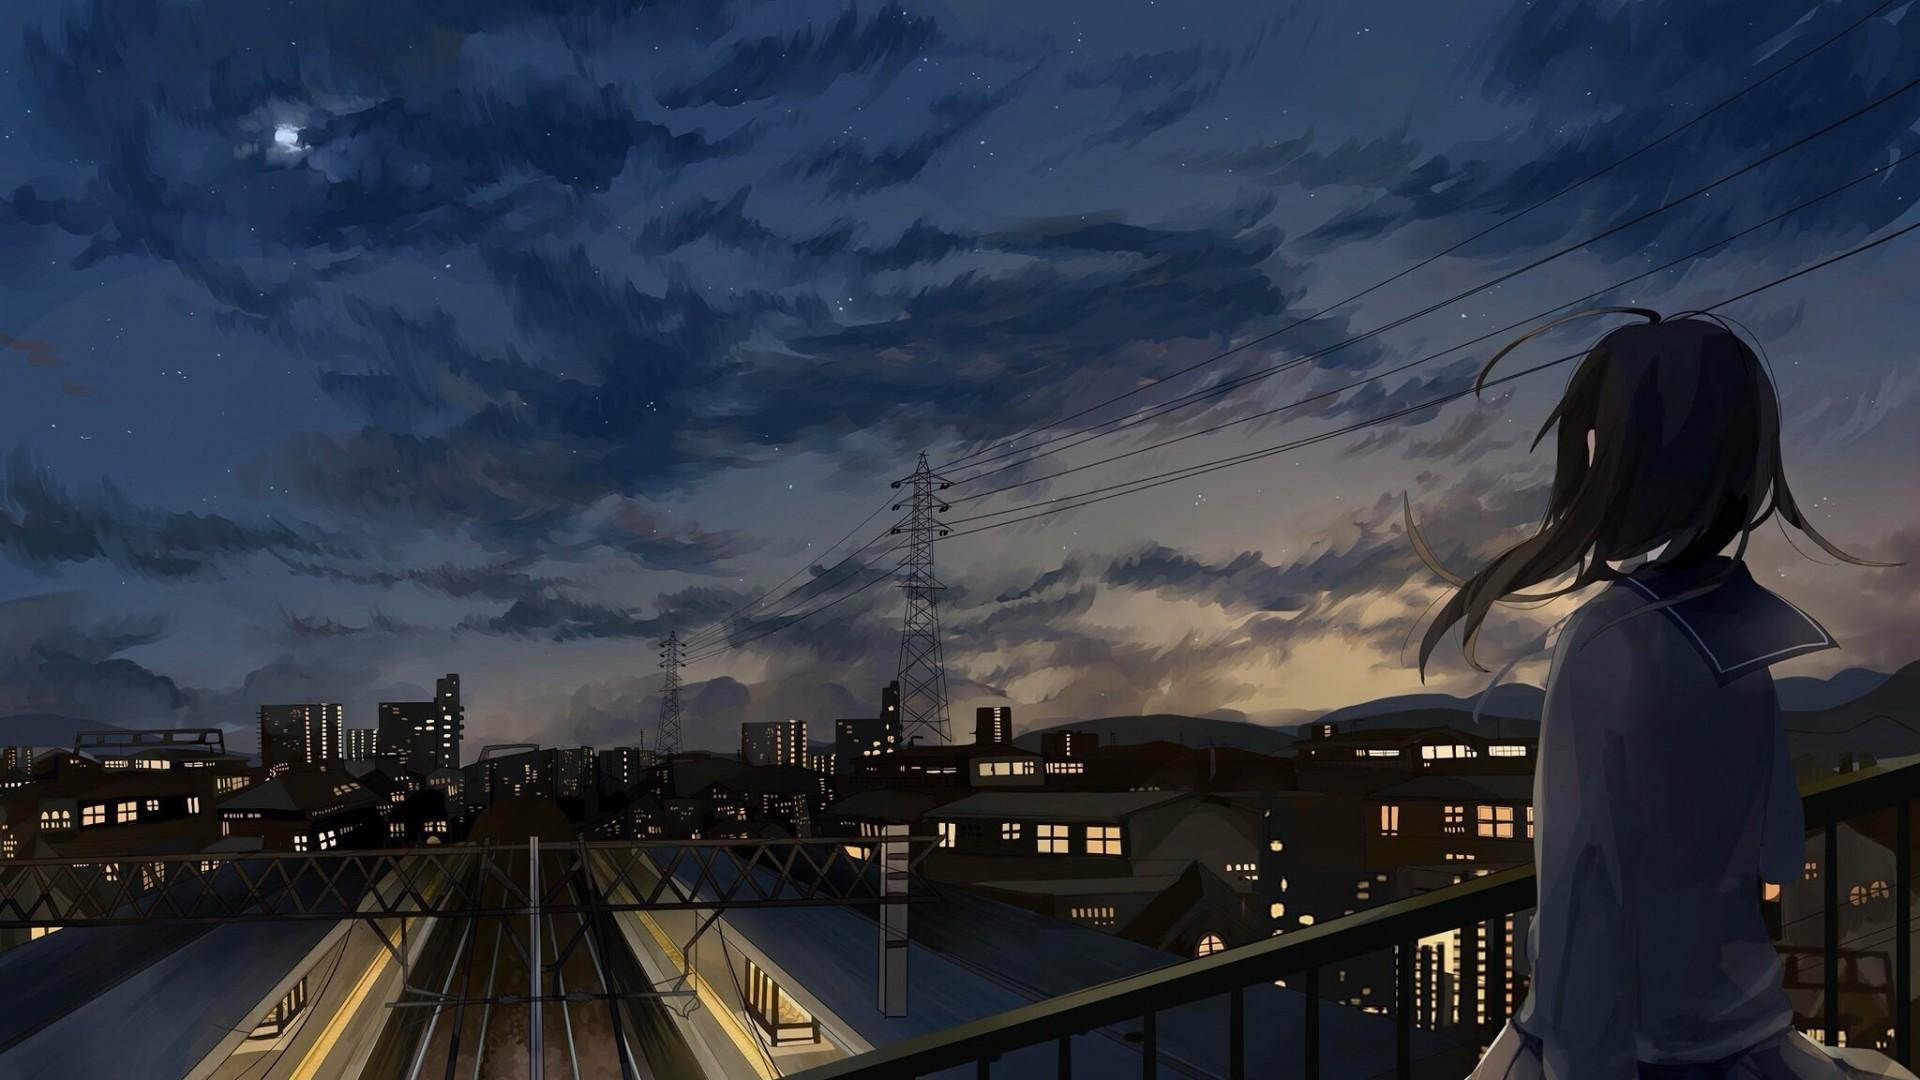 Download 1920x1080 Anime Girl, City, Night, Clouds, Back